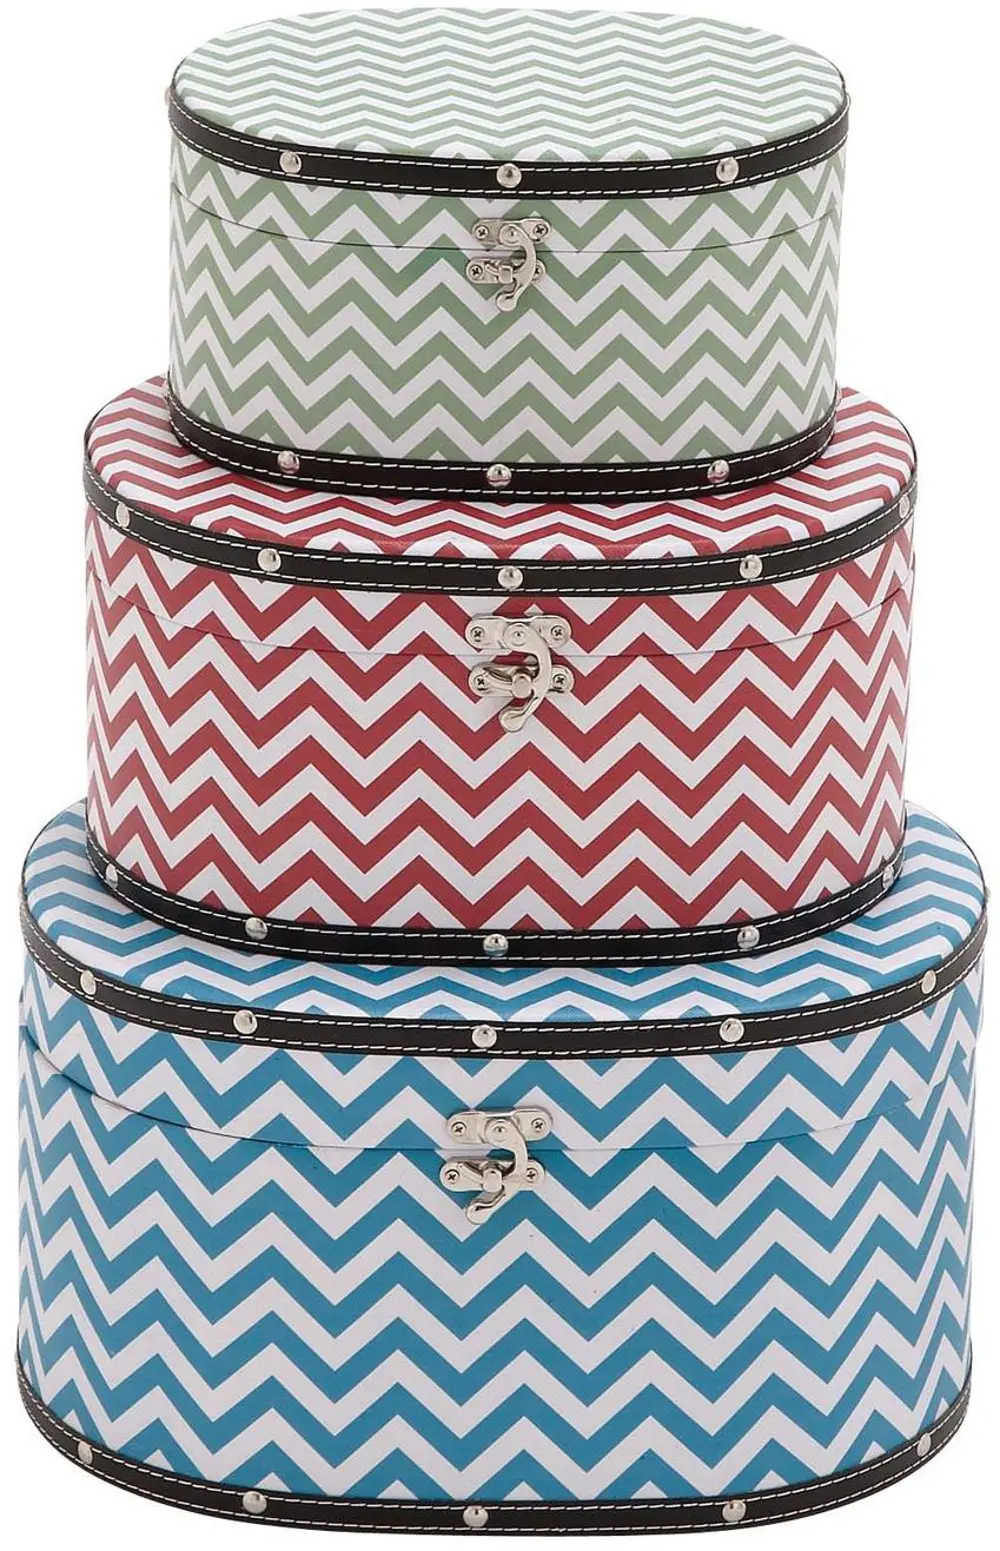 12 Inch Round Wood and Vinyl Chevron Patterned Box-1